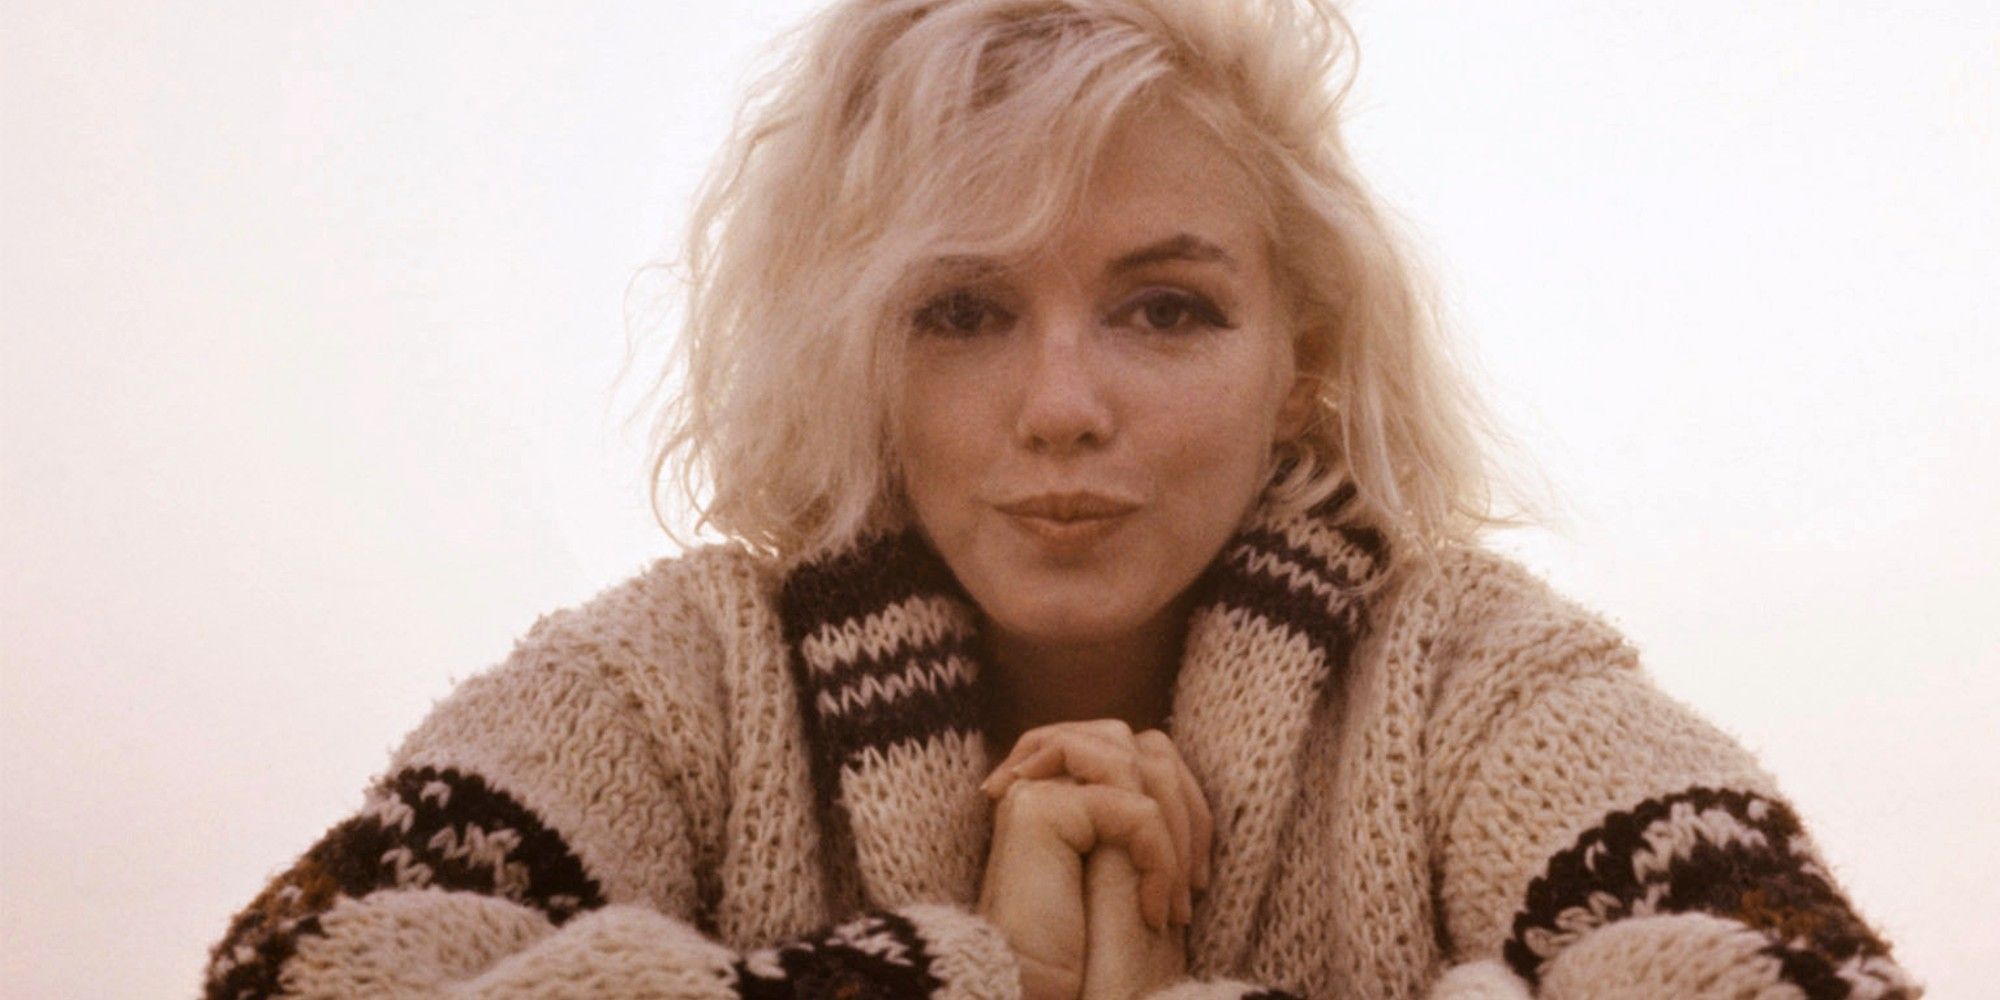 One of the Last Pictures Taken of Marilyn Monroe